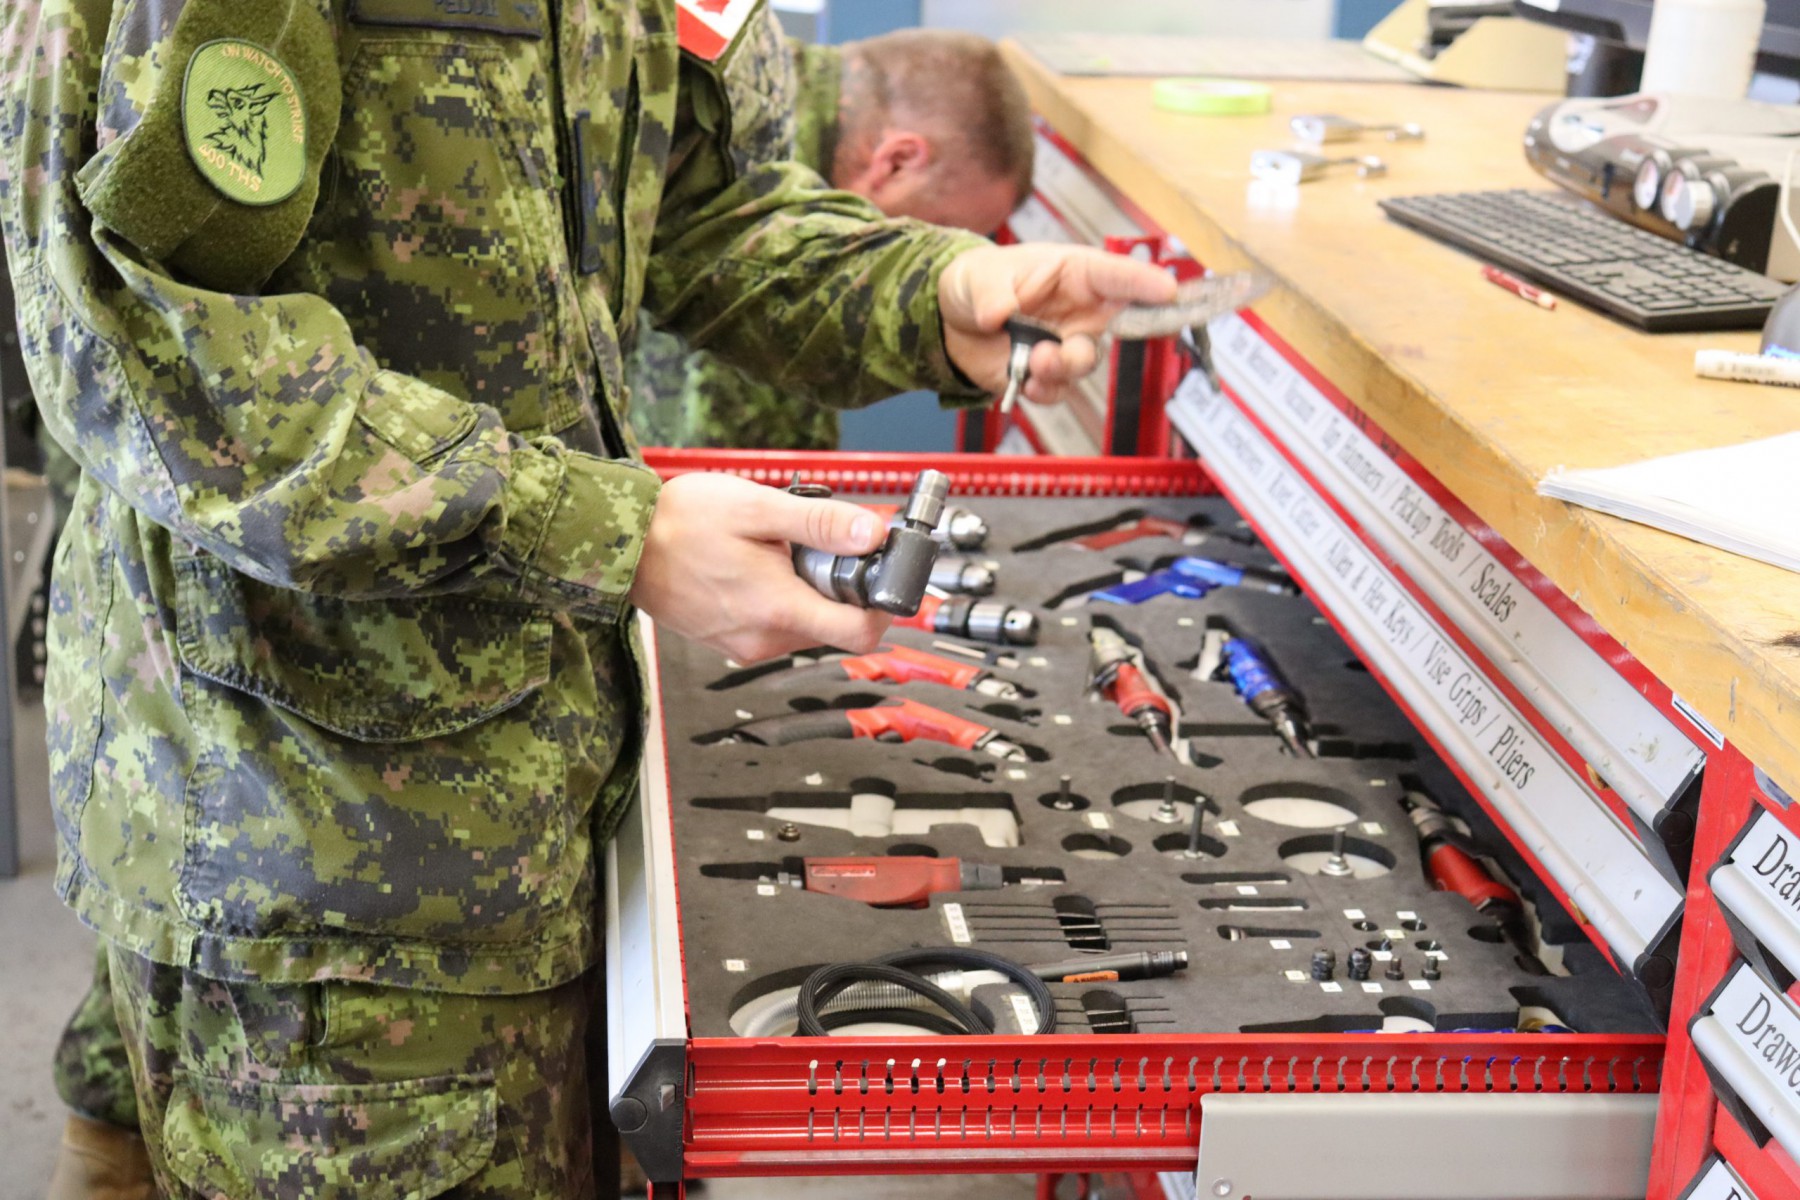 Cpl Peddle displaying the tools used to help craft the blade of the rapier (Caleb Hooper/Borden Citizen)